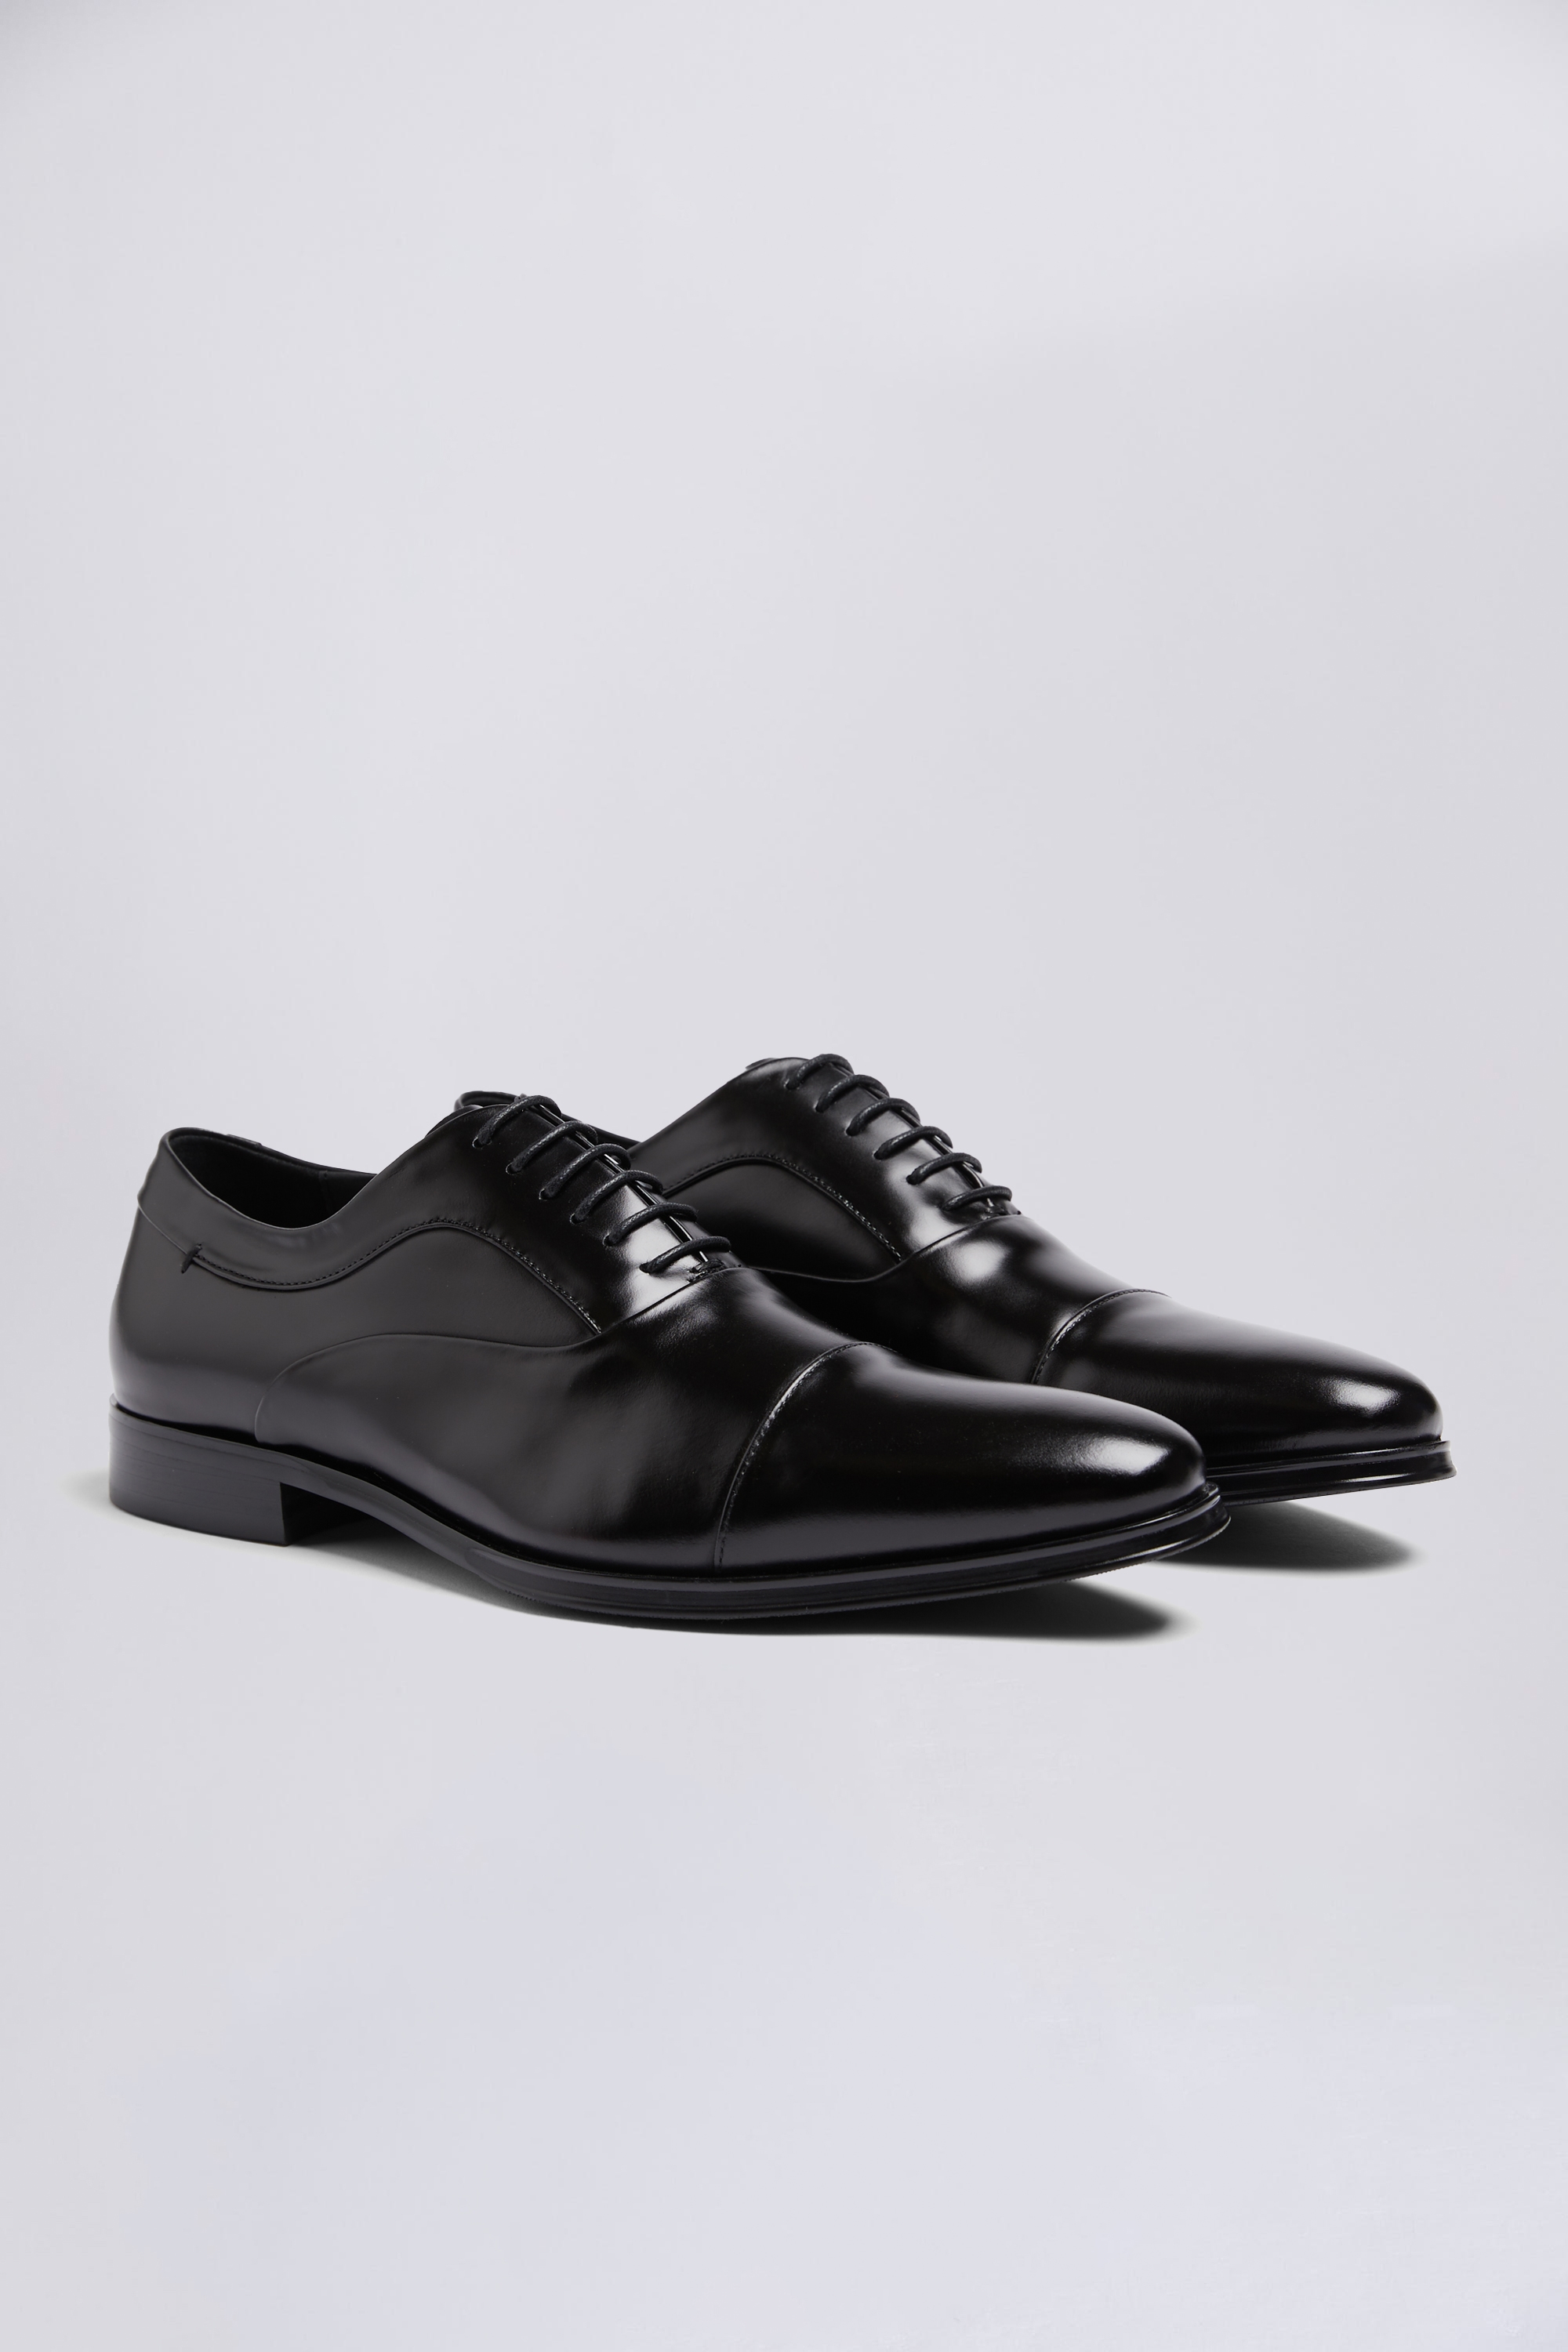 John White Guildhall Black Oxford Shoes | Buy Online at Moss